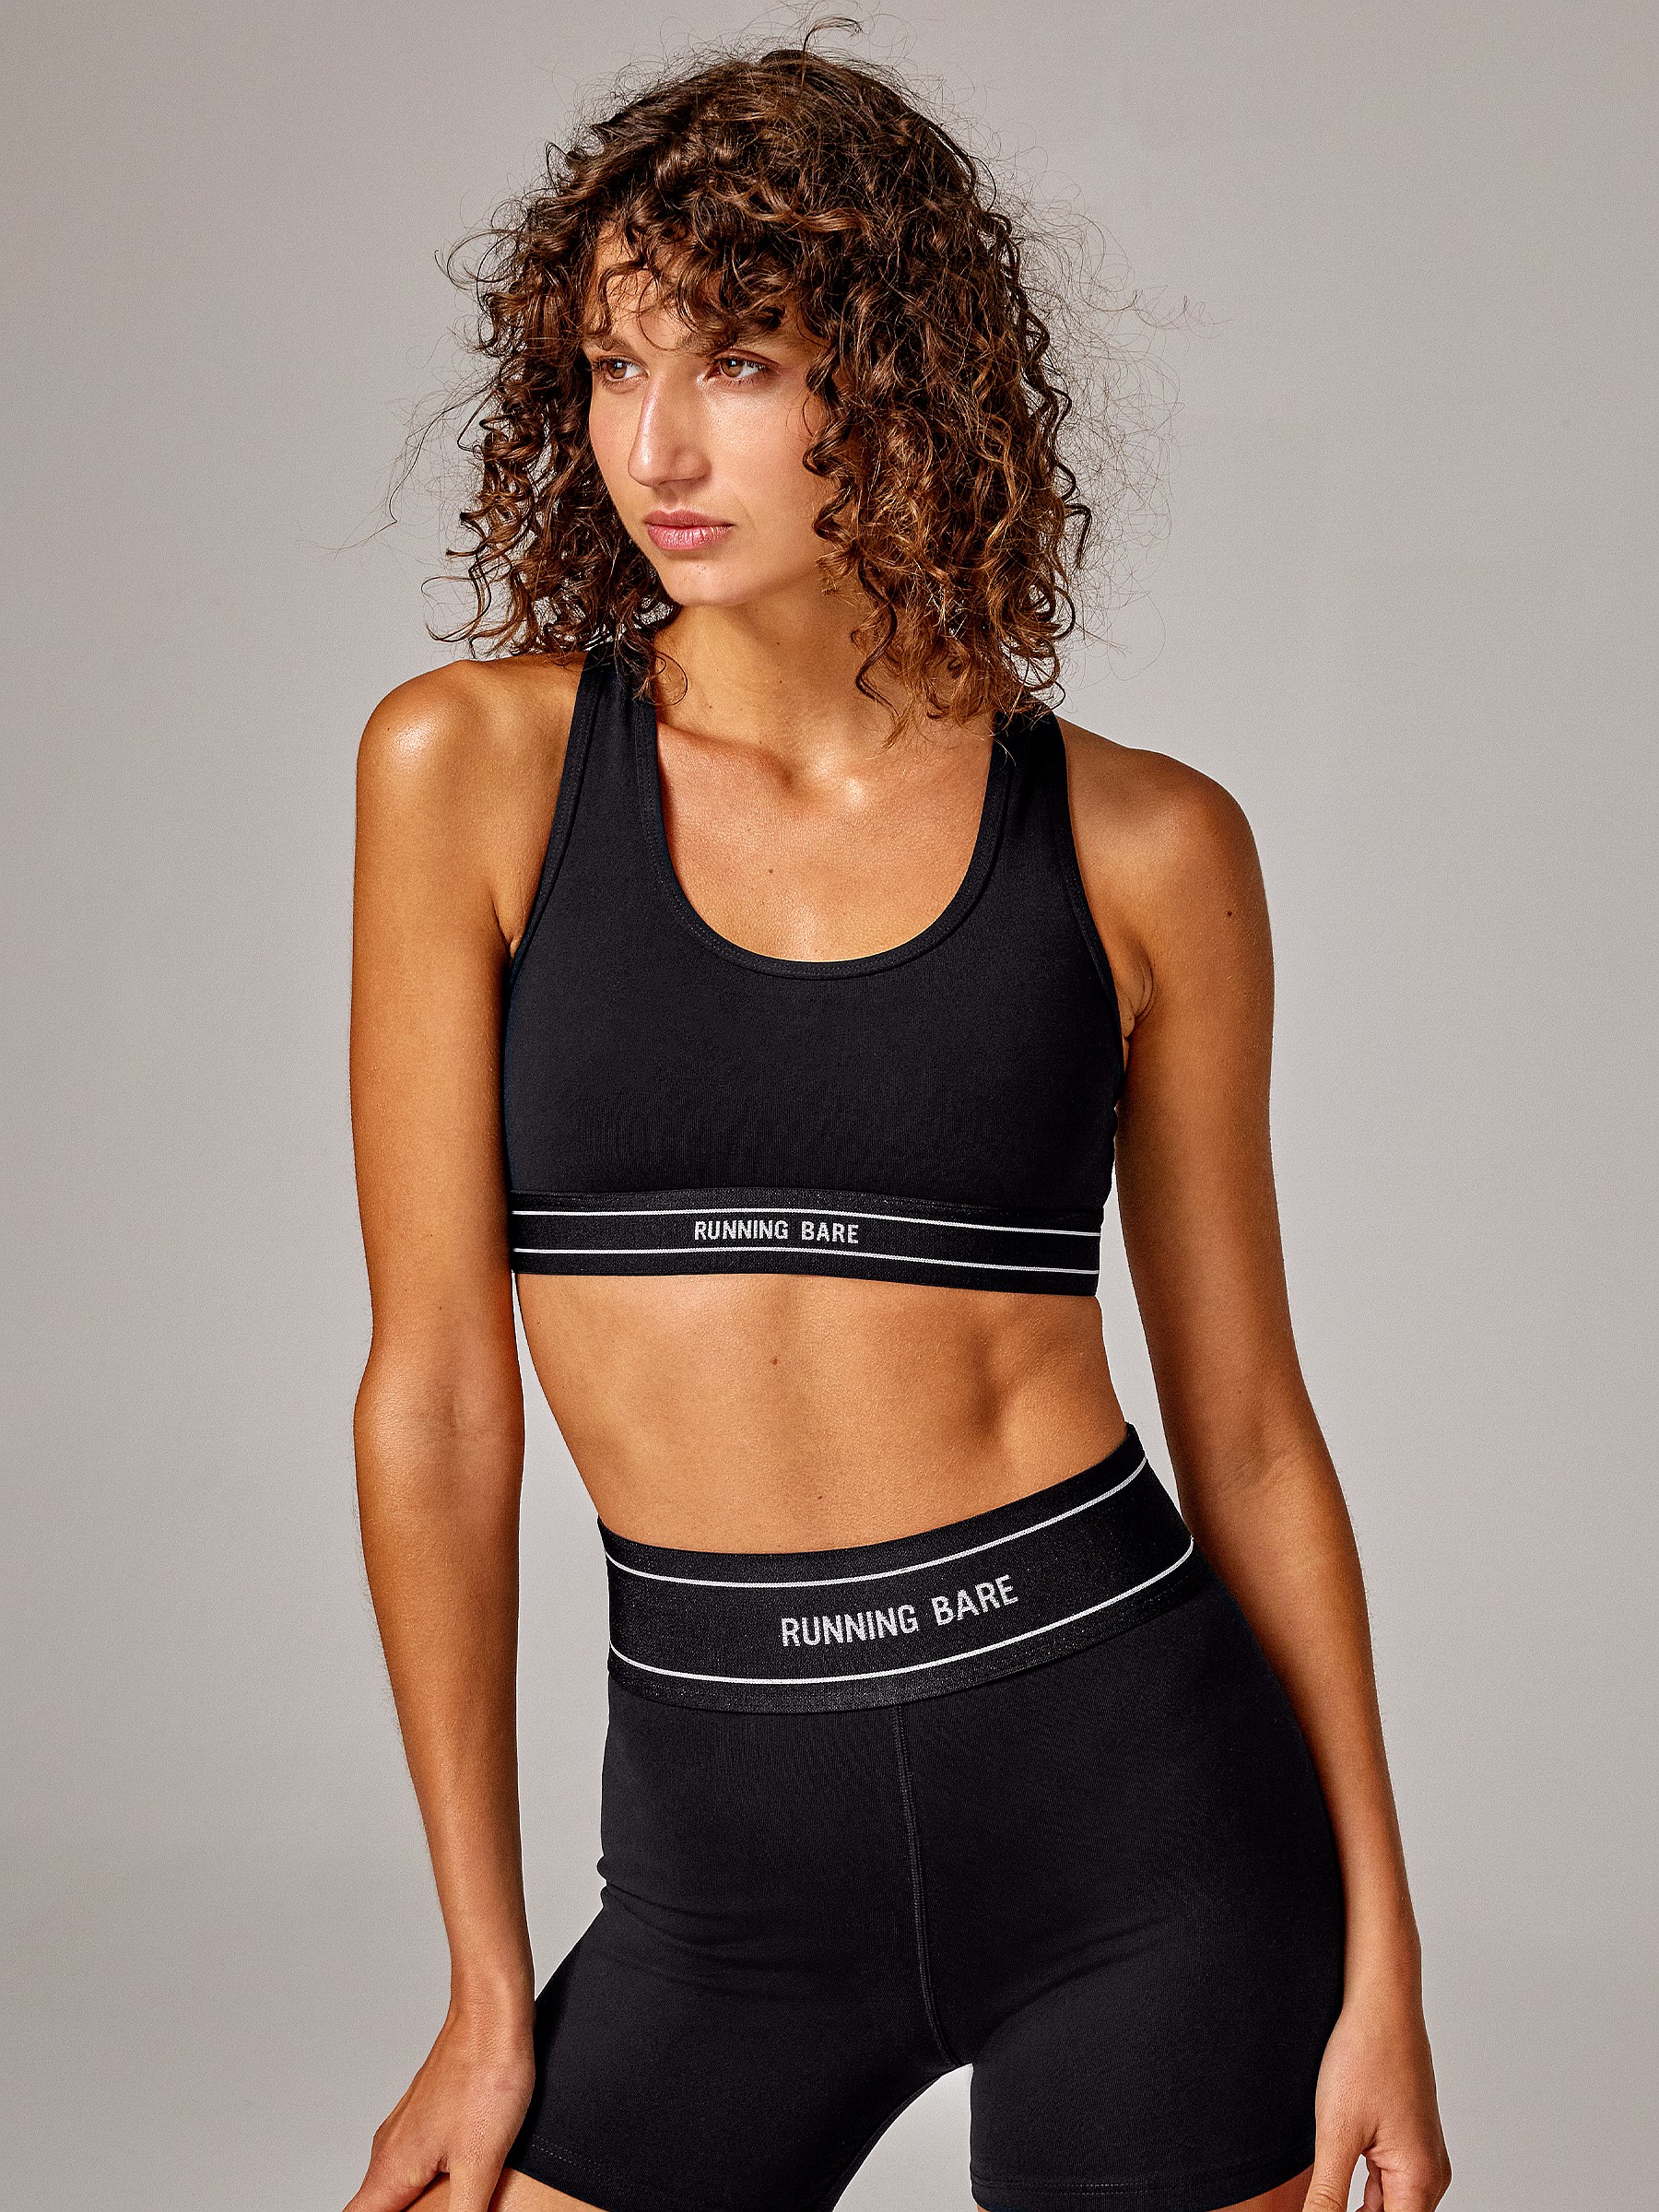 Running Bare Say My Name Sports Bra. Shop Black Workout Crop Tops